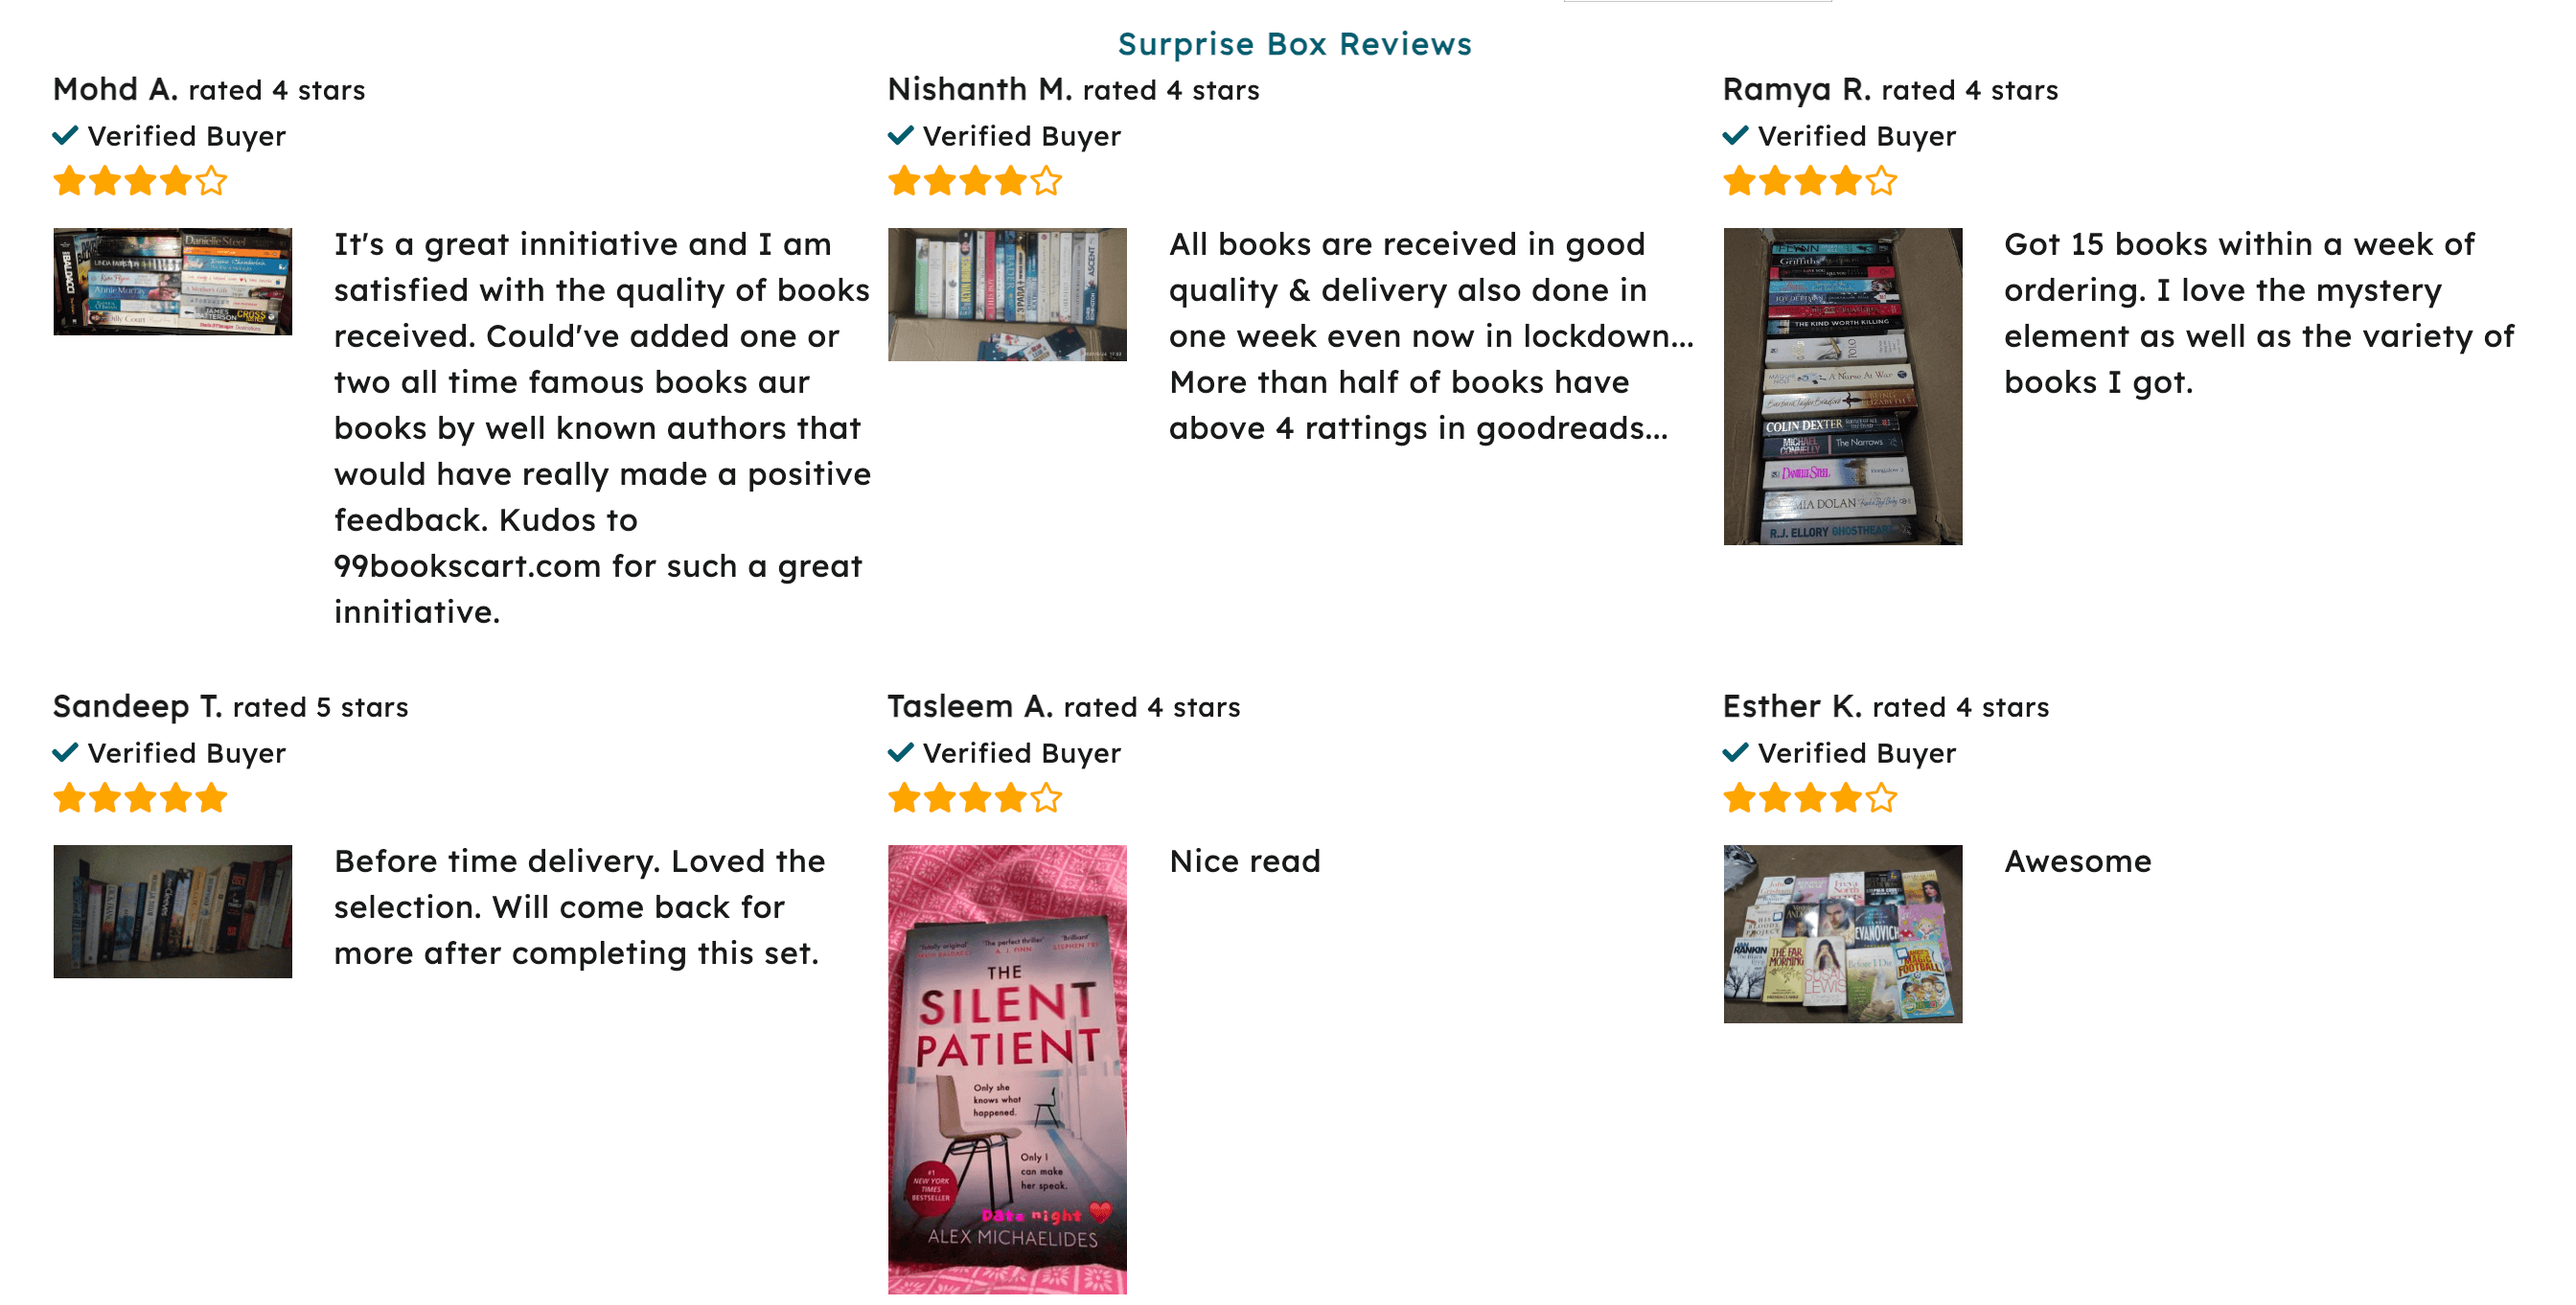 A screenshot from 99BooksCart’s website showing 6 product reviews from books customers received in their surprise boxes. 